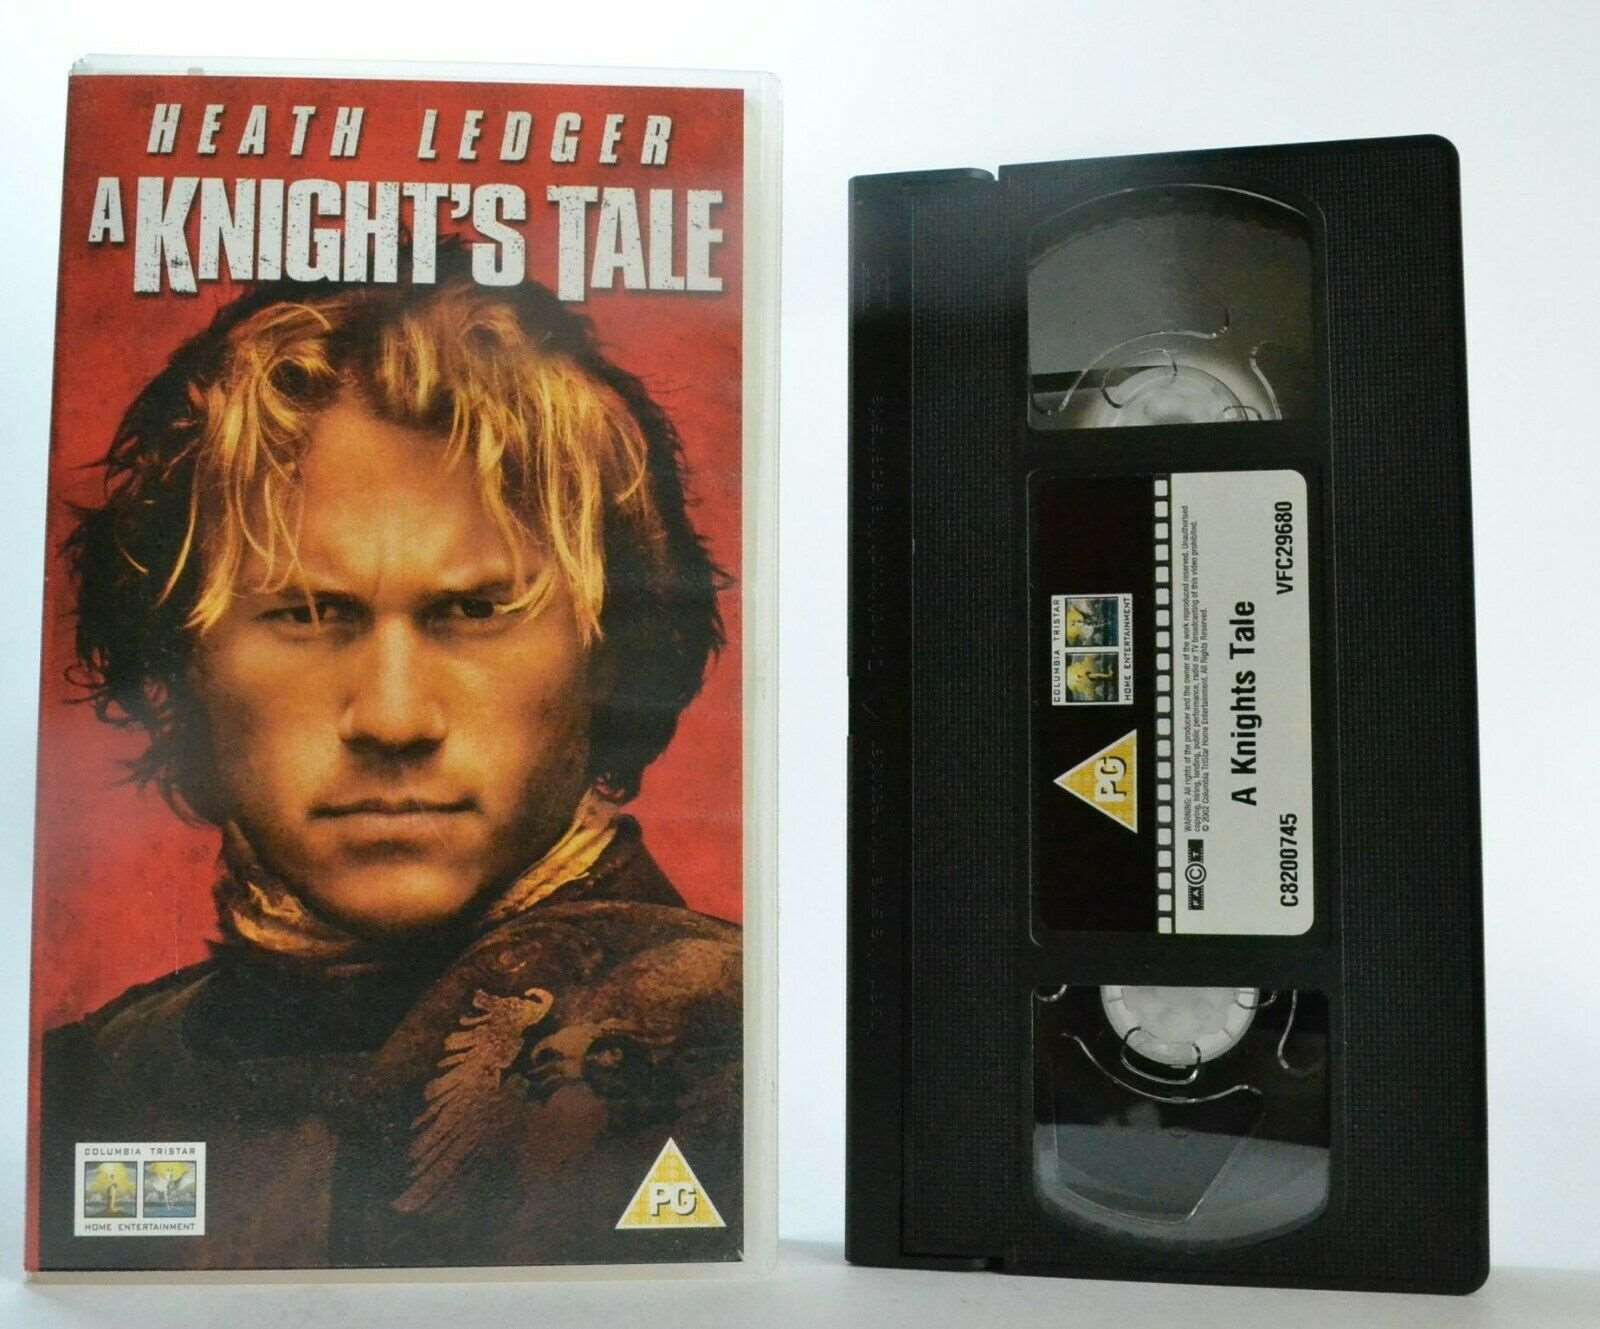 A Knight's Tale: Action Comedy Adventure - 14th Century - Heath Ledger - Pal VHS-